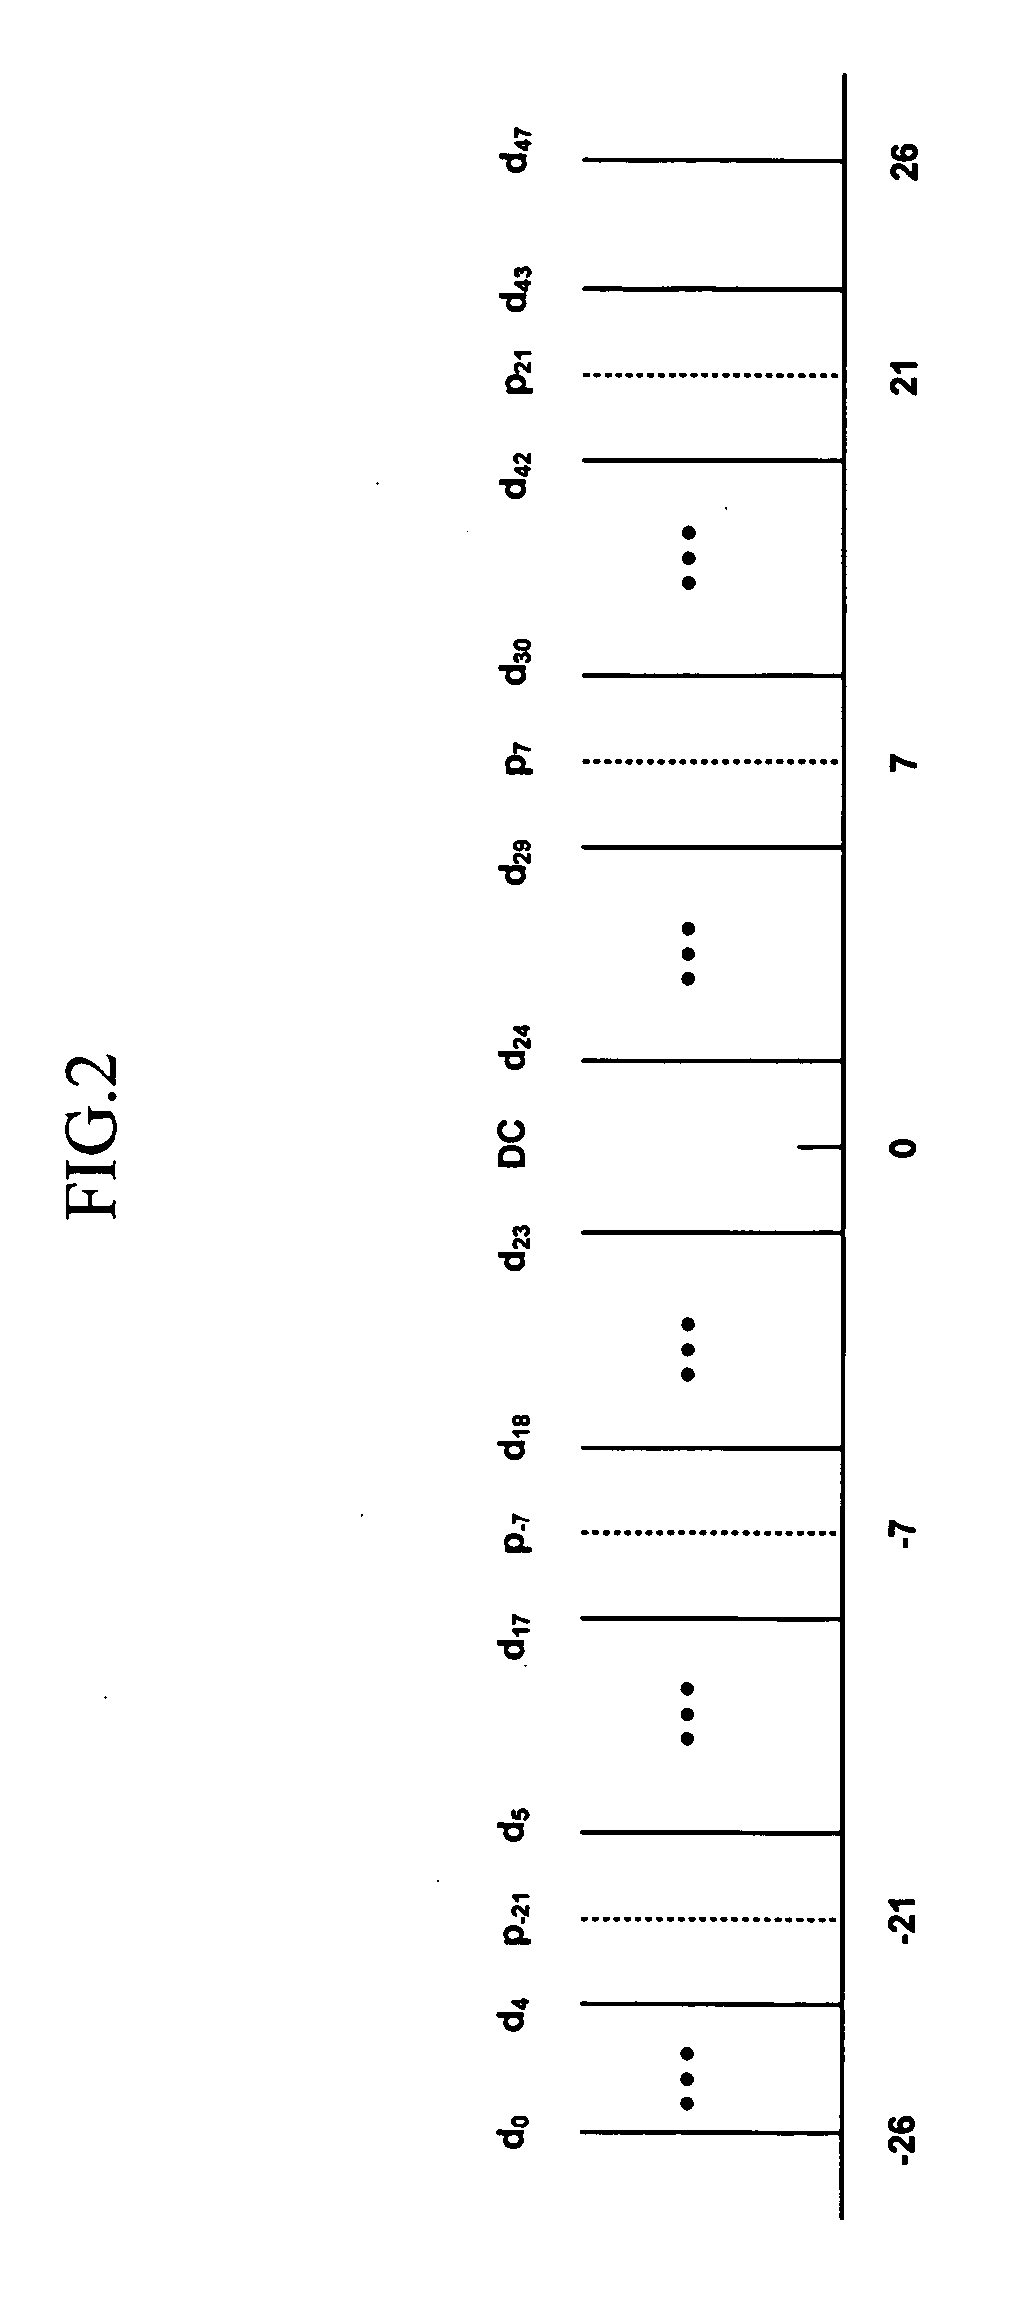 Residual frequency, phase, timing offset and signal amplitude variation tracking apparatus and methods for OFDM systems